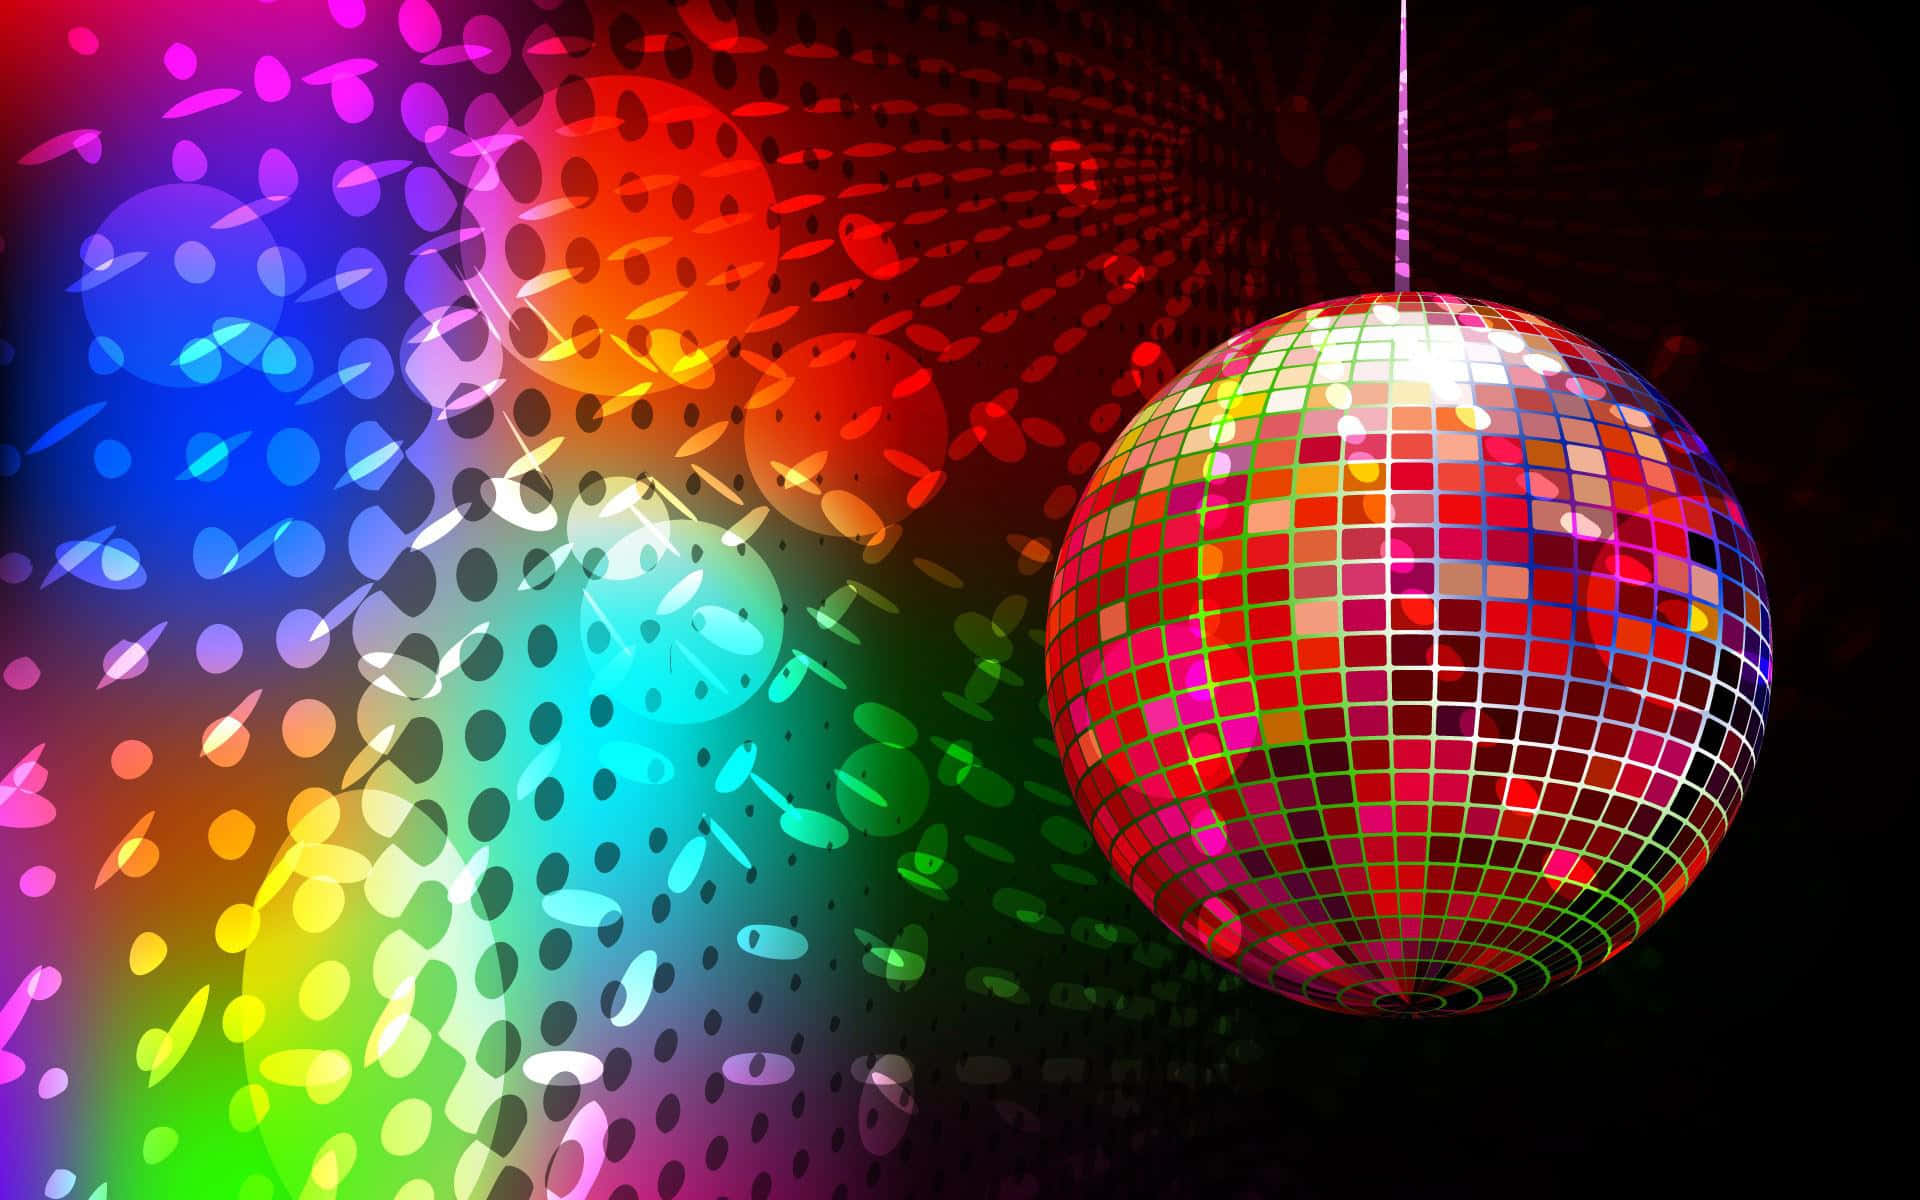 Watch 50 Disco Balls Fill a Room With Magical Shimmering Light  WIRED